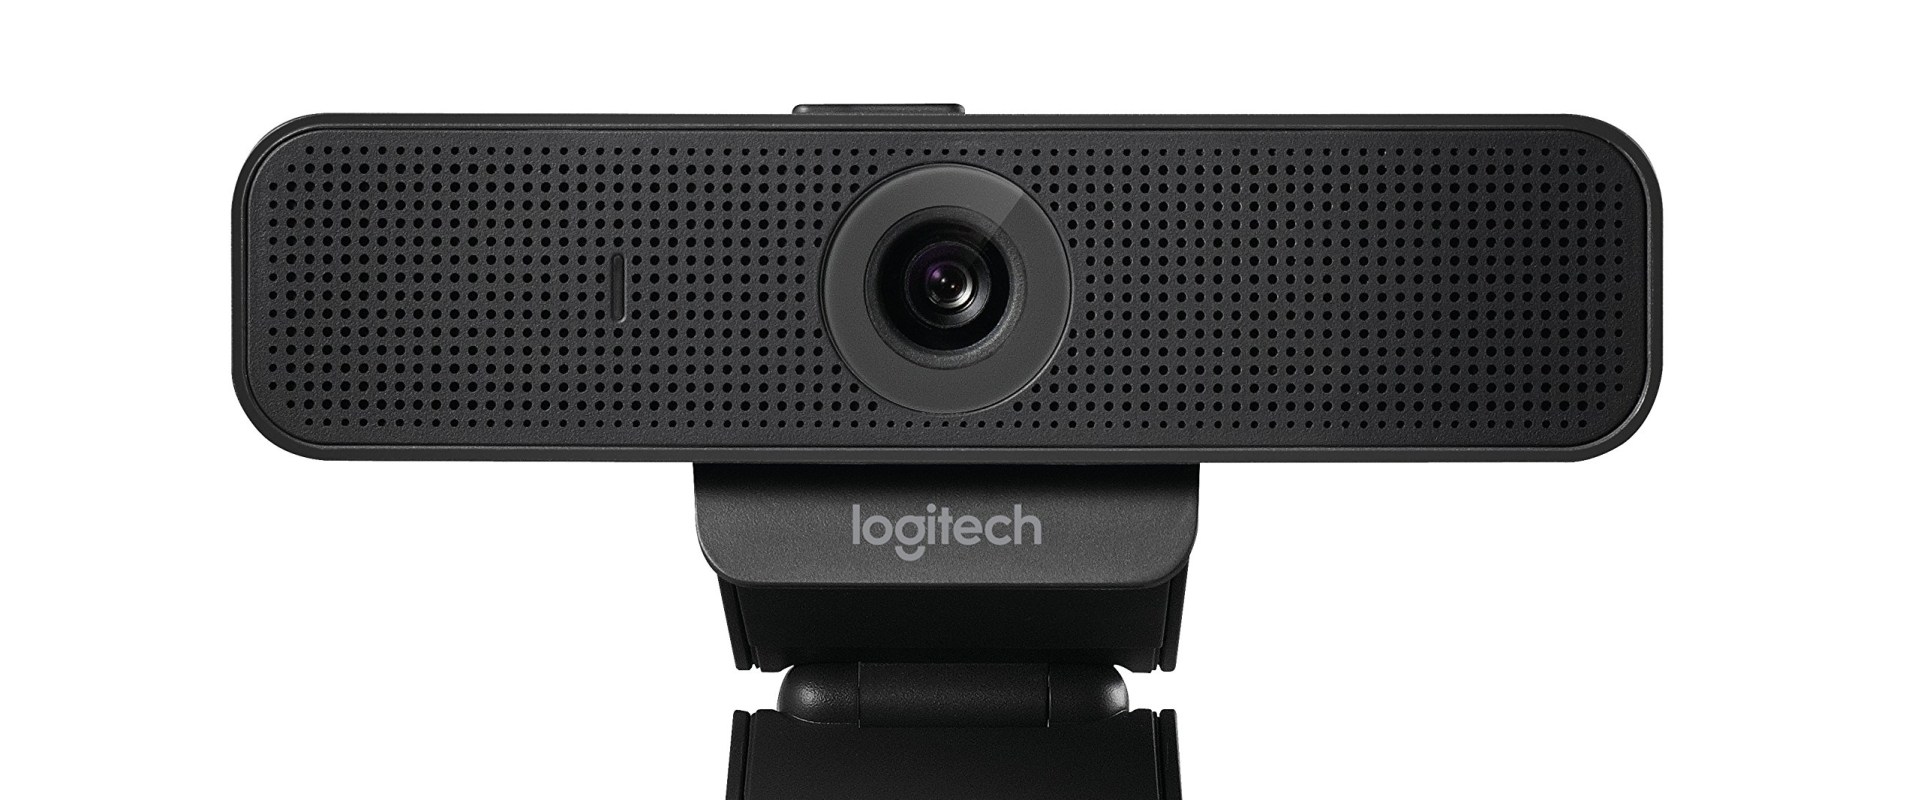 Installation Considerations for Portable Webcams